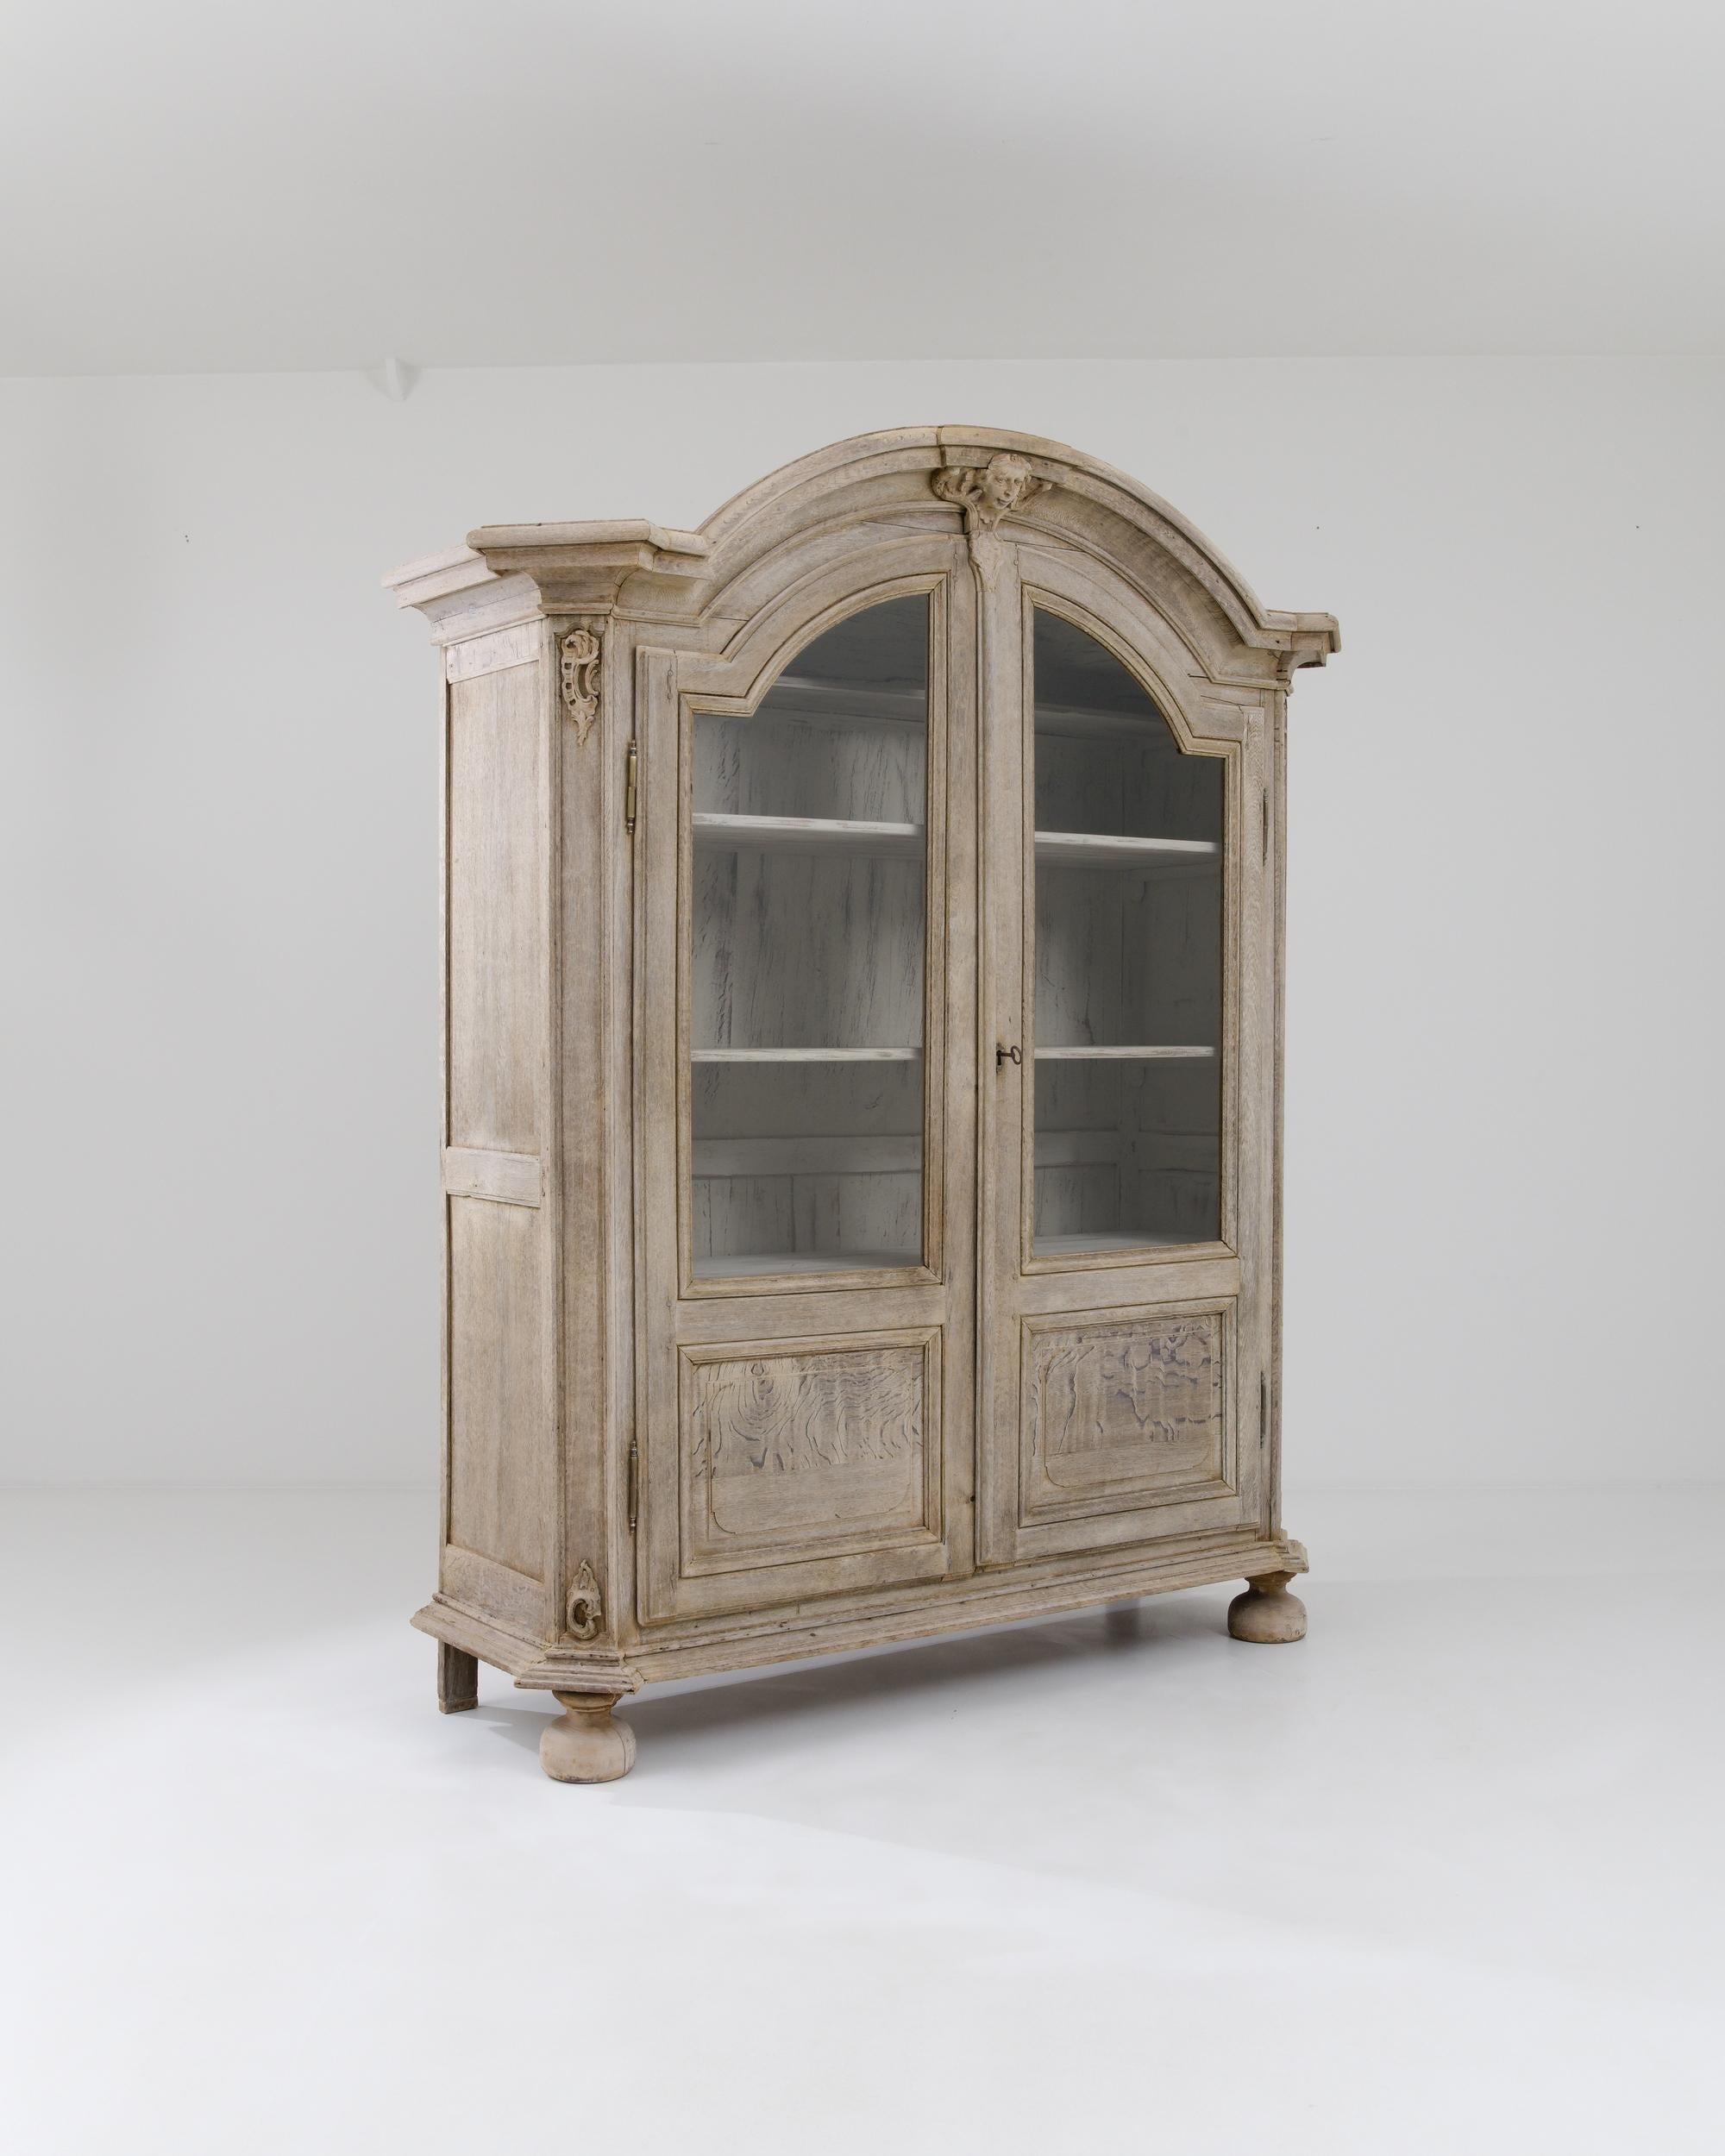 A wooden vitrine made in 19th century France. Exuding a grand and inviting aura, this vitrine towers overhead, dazzling with its design and details. The surface of this vitrine’s wood has been carefully restored through a bleaching process which